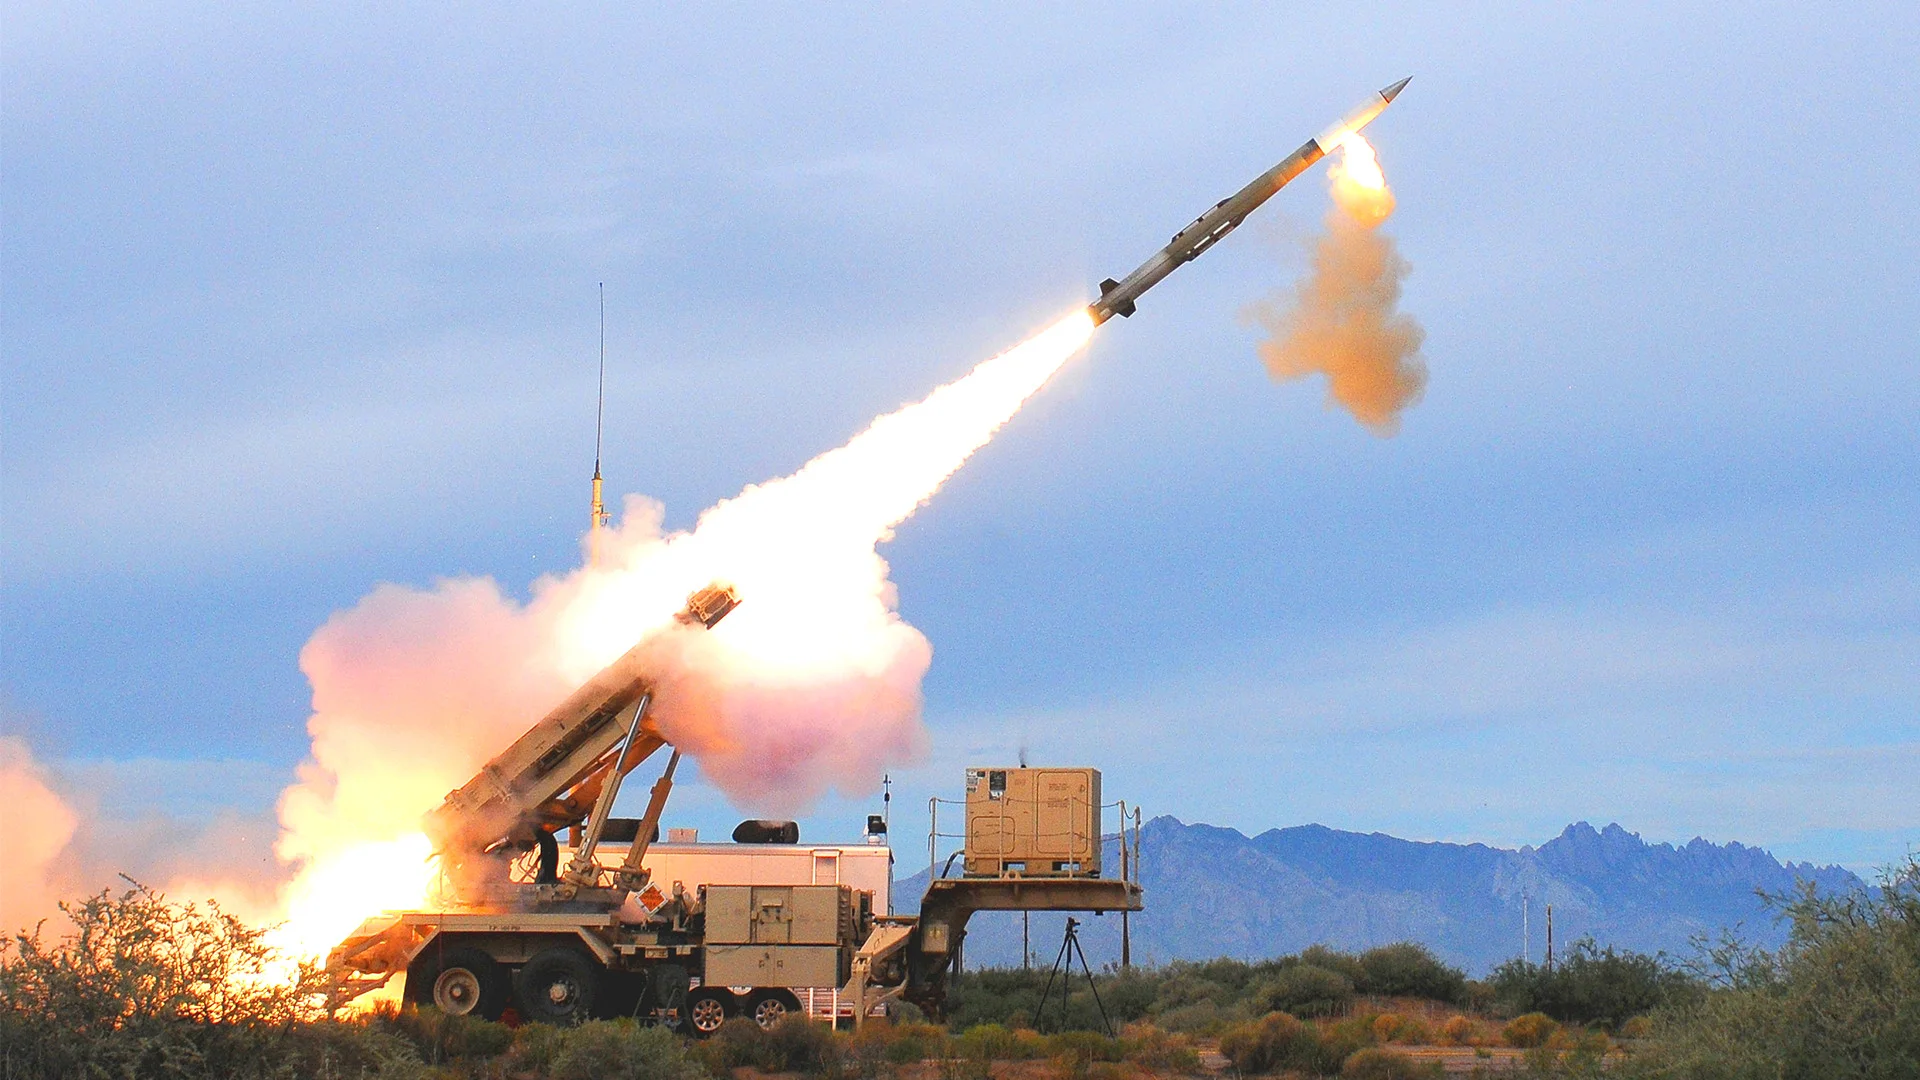 Lockheed Martin receives $2.45bn to produce PAC-3 missiles for MIM-104 PATRIOT air defence systems